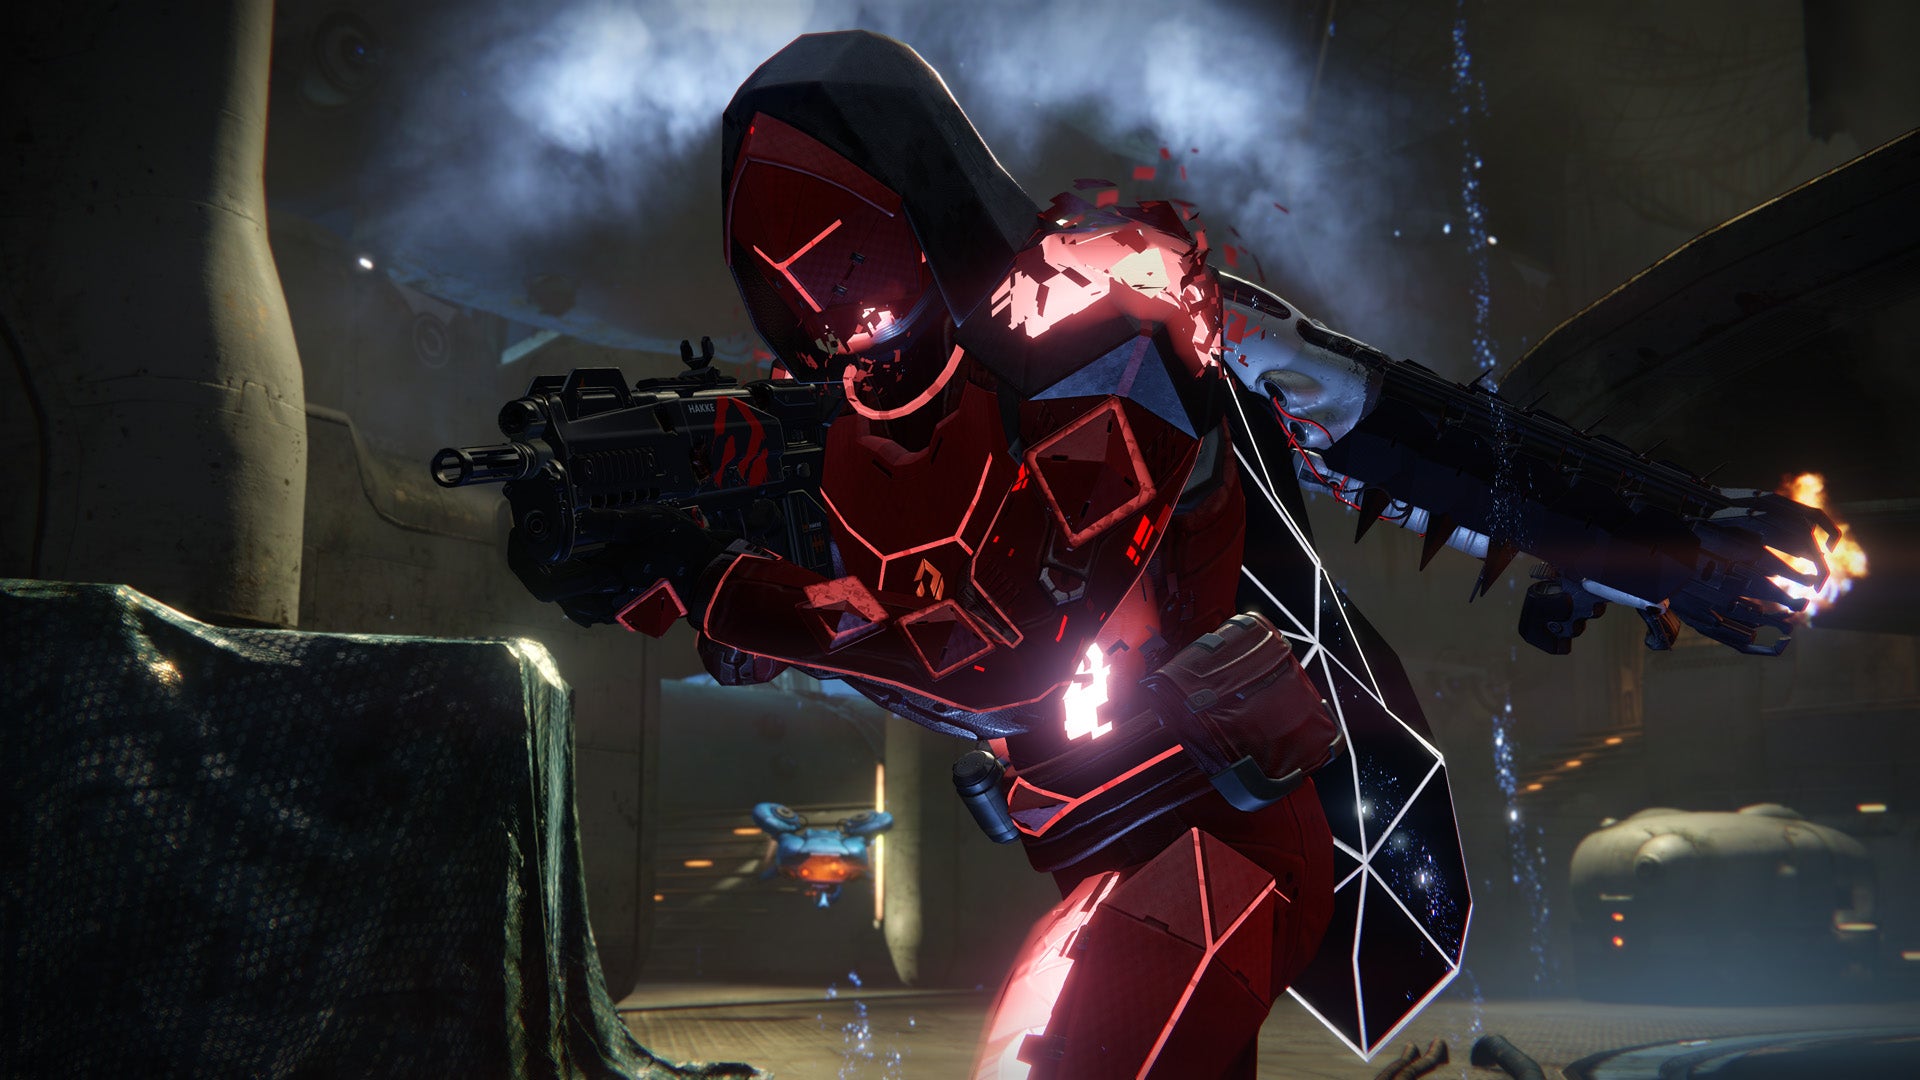 Image for Destiny weekly reset for April 25 - Nightfall, Crucible, Challenge of Elders, featured raid changes detailed